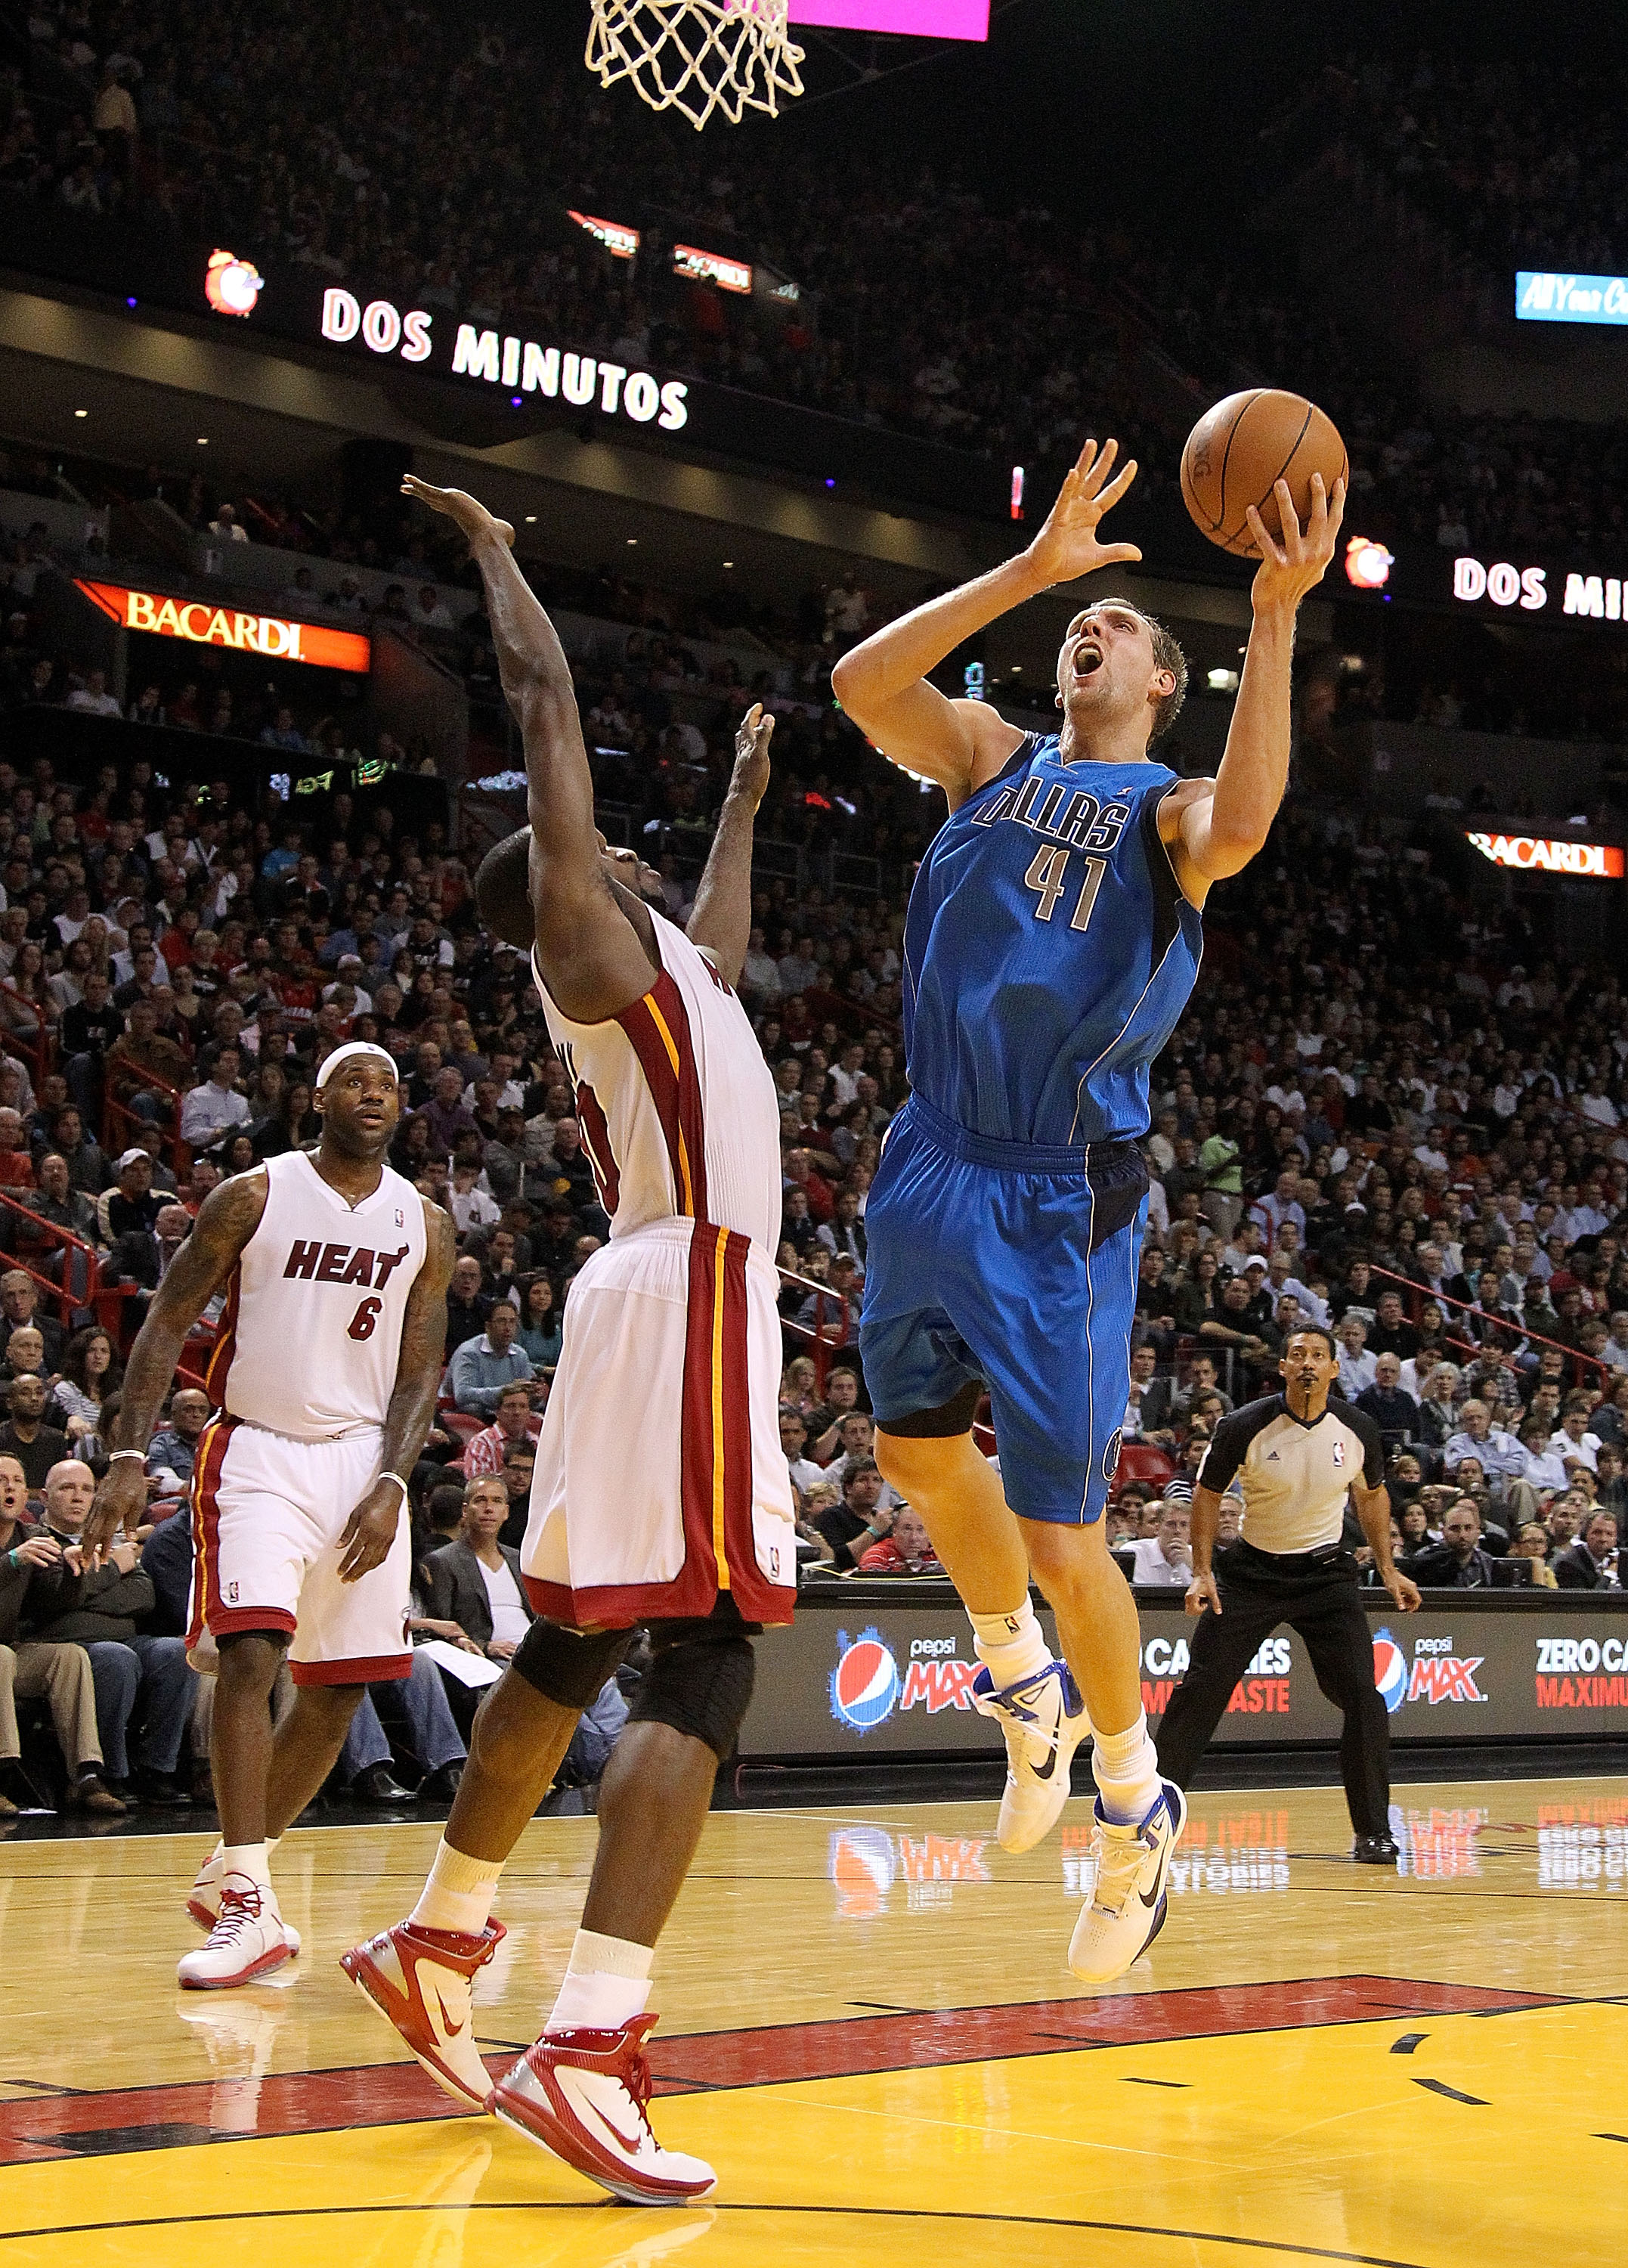 MIAMI, FL - DECEMBER 20:  Dirk Nowitzki #41 of the Dallas Mavericks shoots over Joel Anthony #50 of the Miami Heat during a game at American Airlines Arena on December 20, 2010 in Miami, Florida. NOTE TO USER: User expressly acknowledges and agrees that,